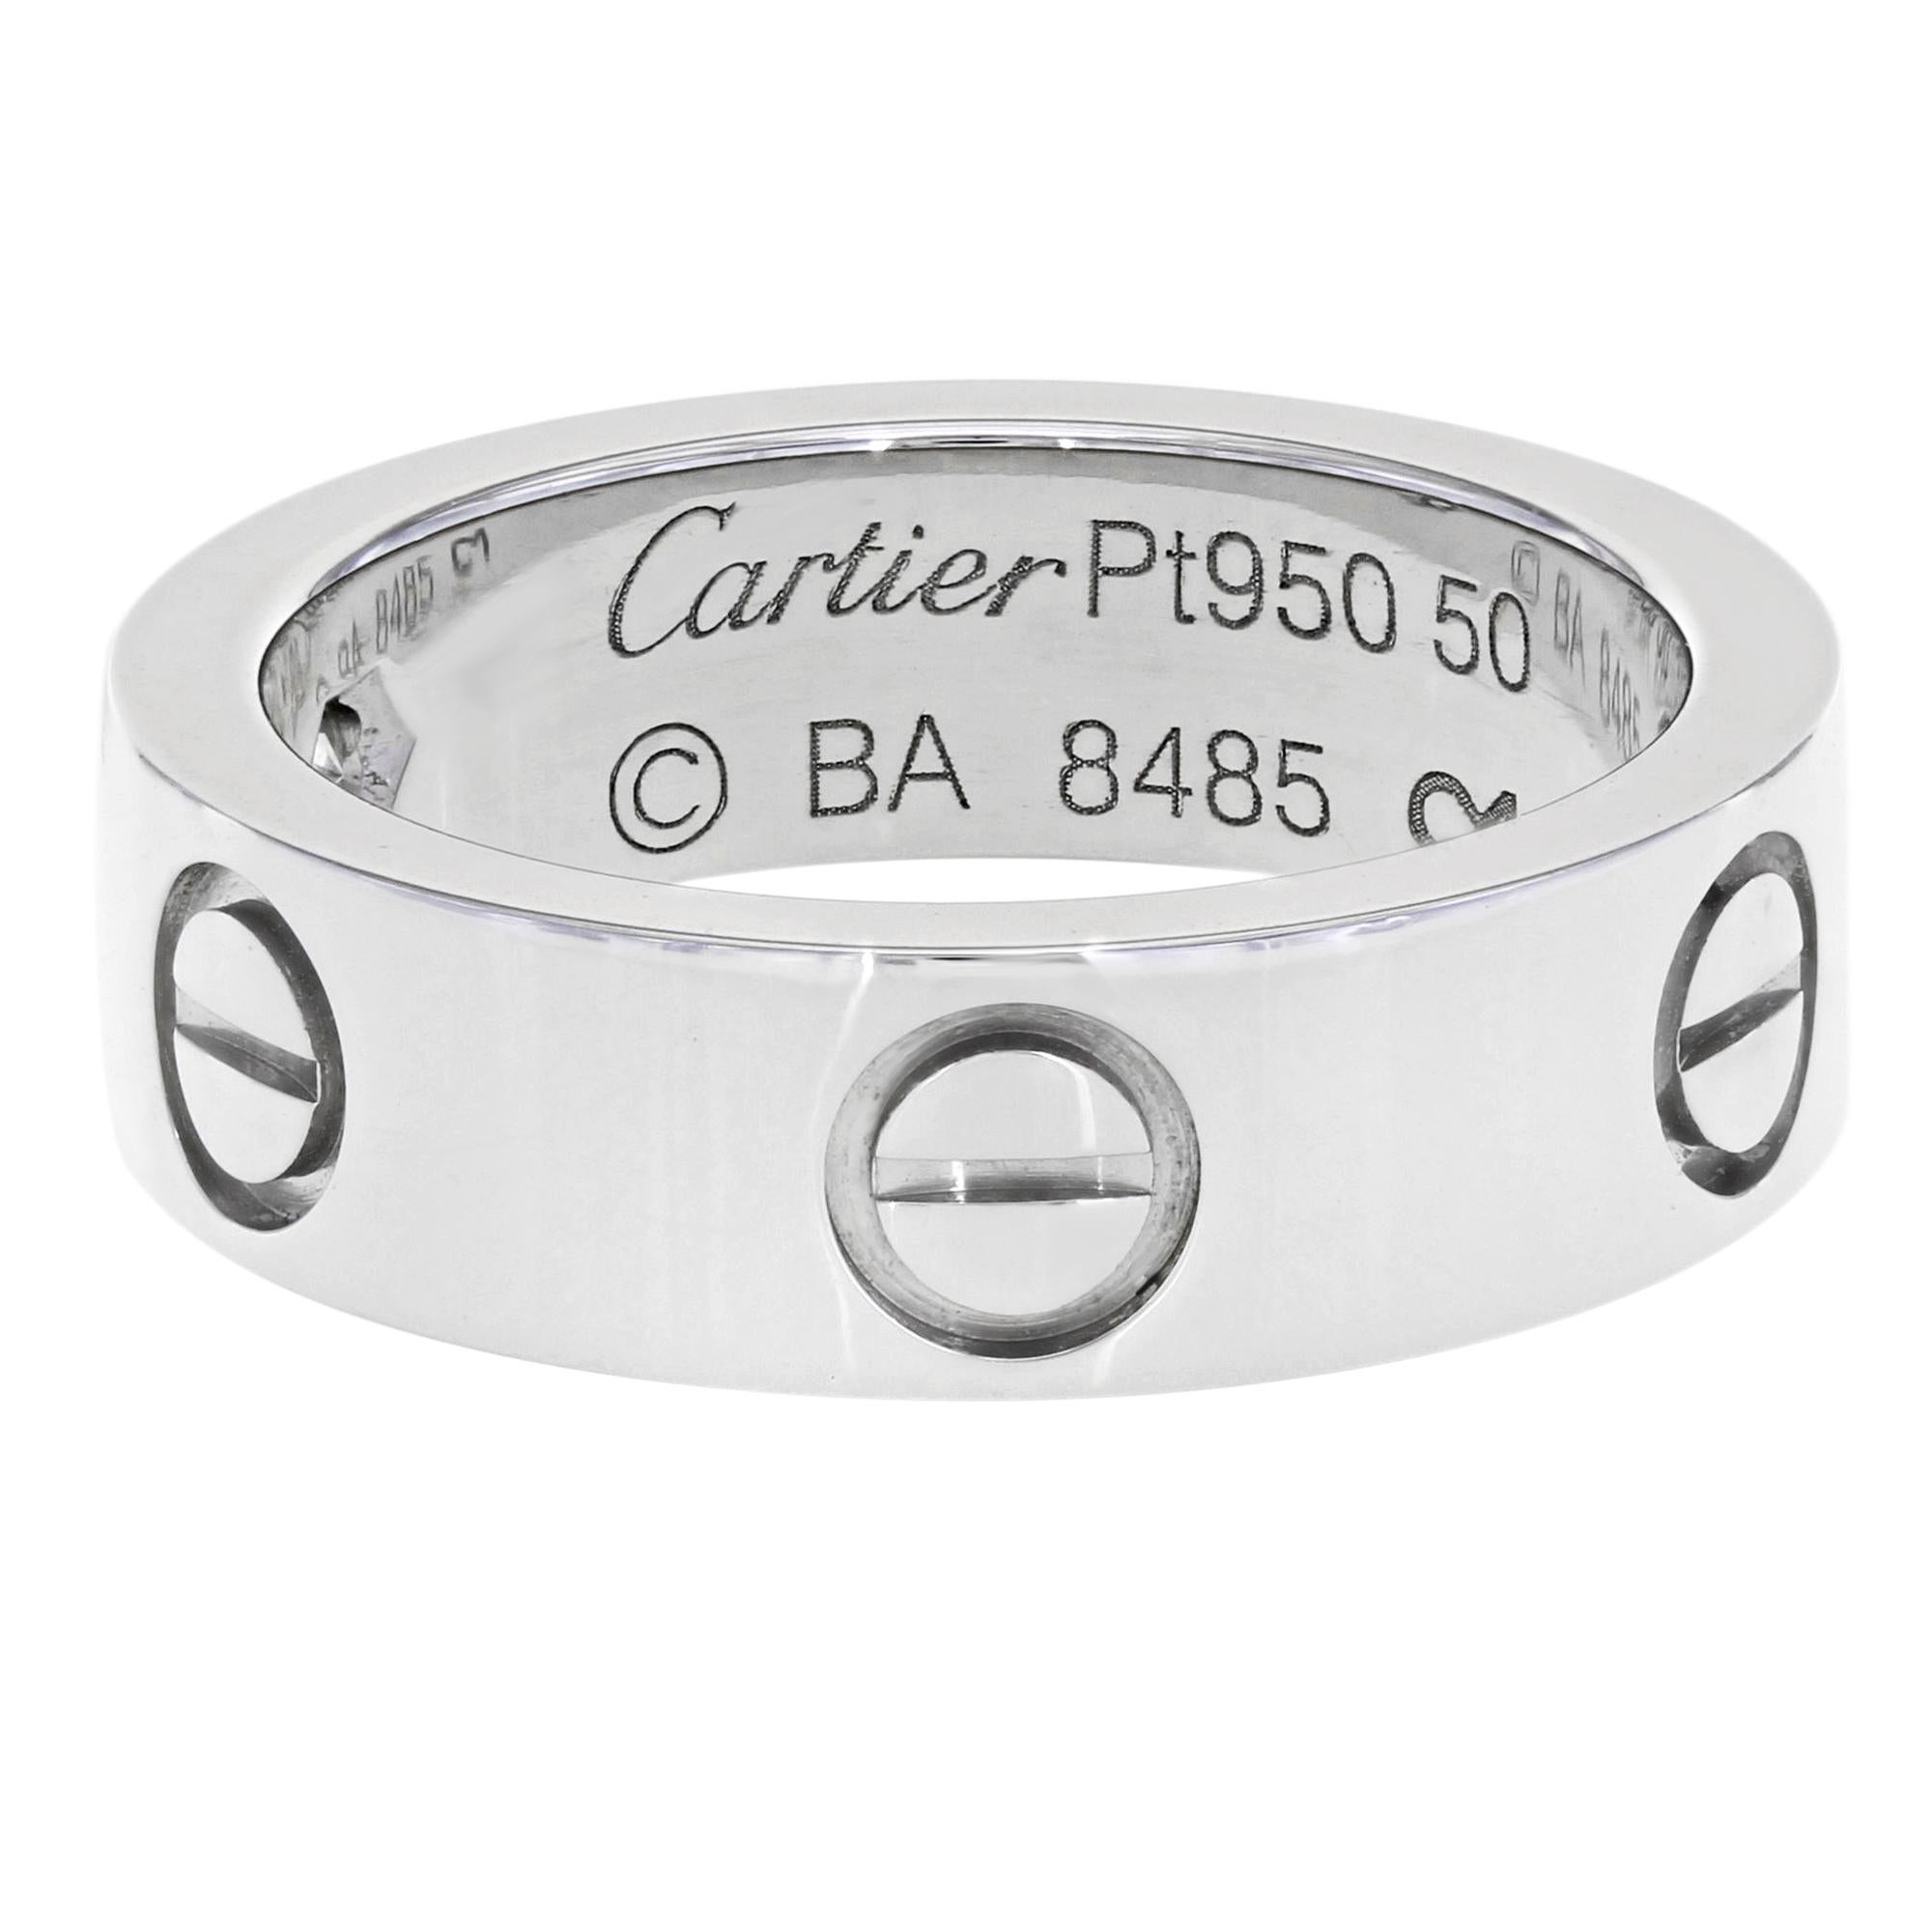 Cartier love collection ring set with one round diamond in Platinum. Ring width 5.4mm.

Platinum weighs 11.9g
1 round diamonds, total weight 0.07ct
Diamond F color VS1 clarity 
Band measures 5.4mm wide        
Ring US Size 5.25                      